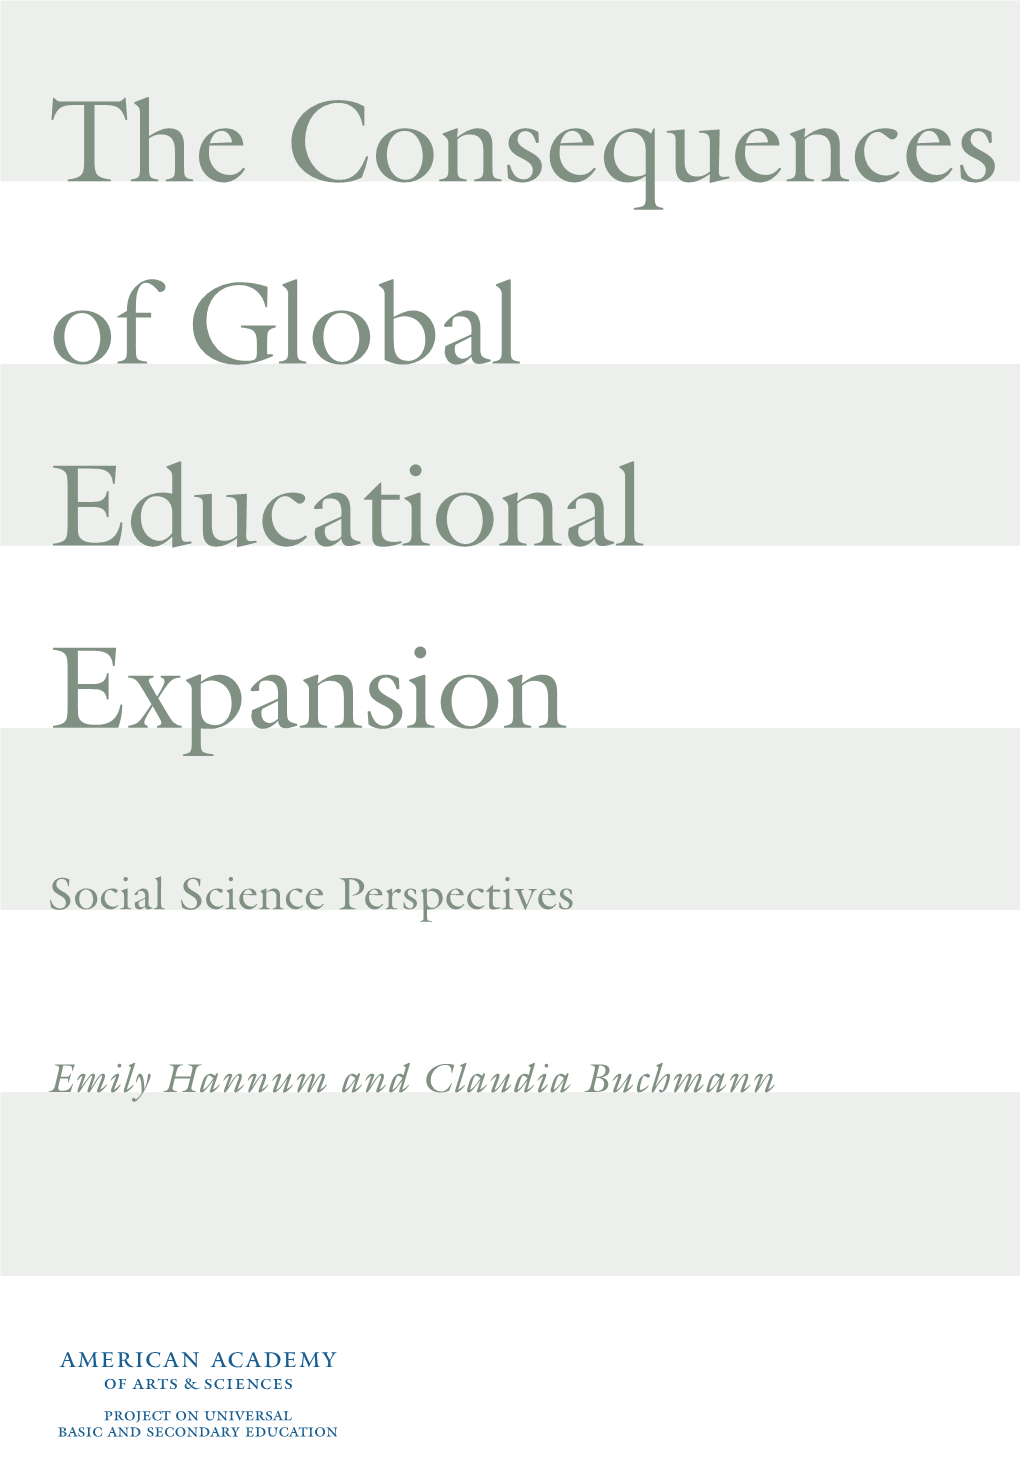 The Consequences of Global Educational Expansion